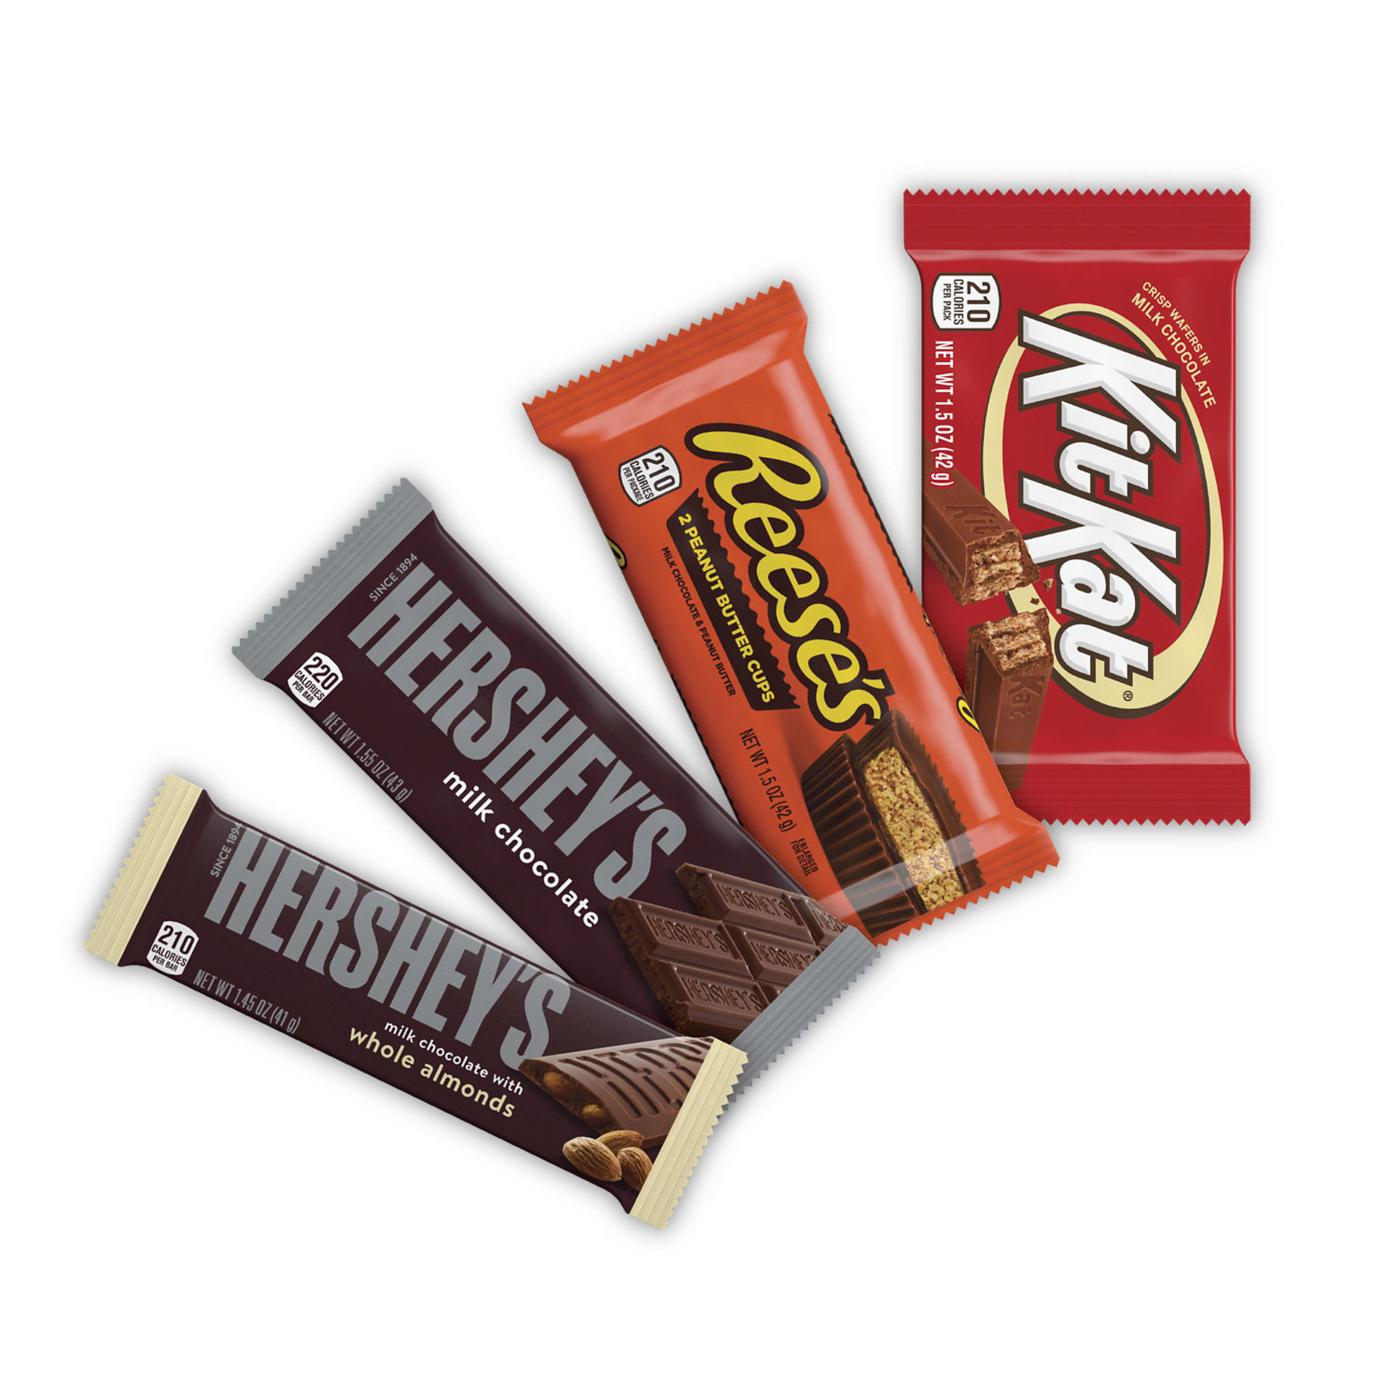 Hershey's Assorted Chocolate Candy Bars Bulk Pack; image 7 of 7